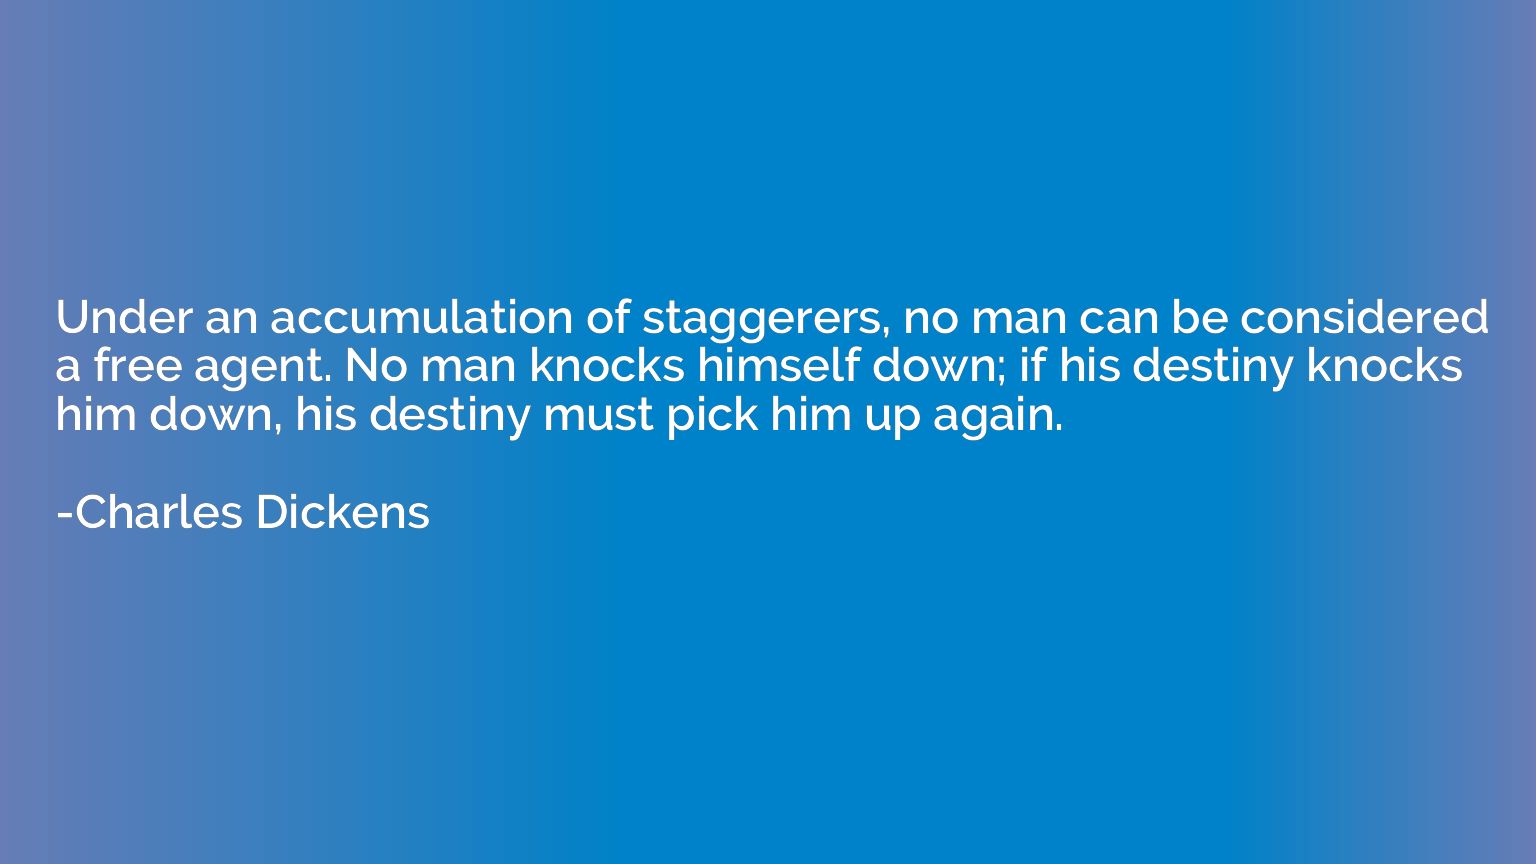 Under an accumulation of staggerers, no man can be considere